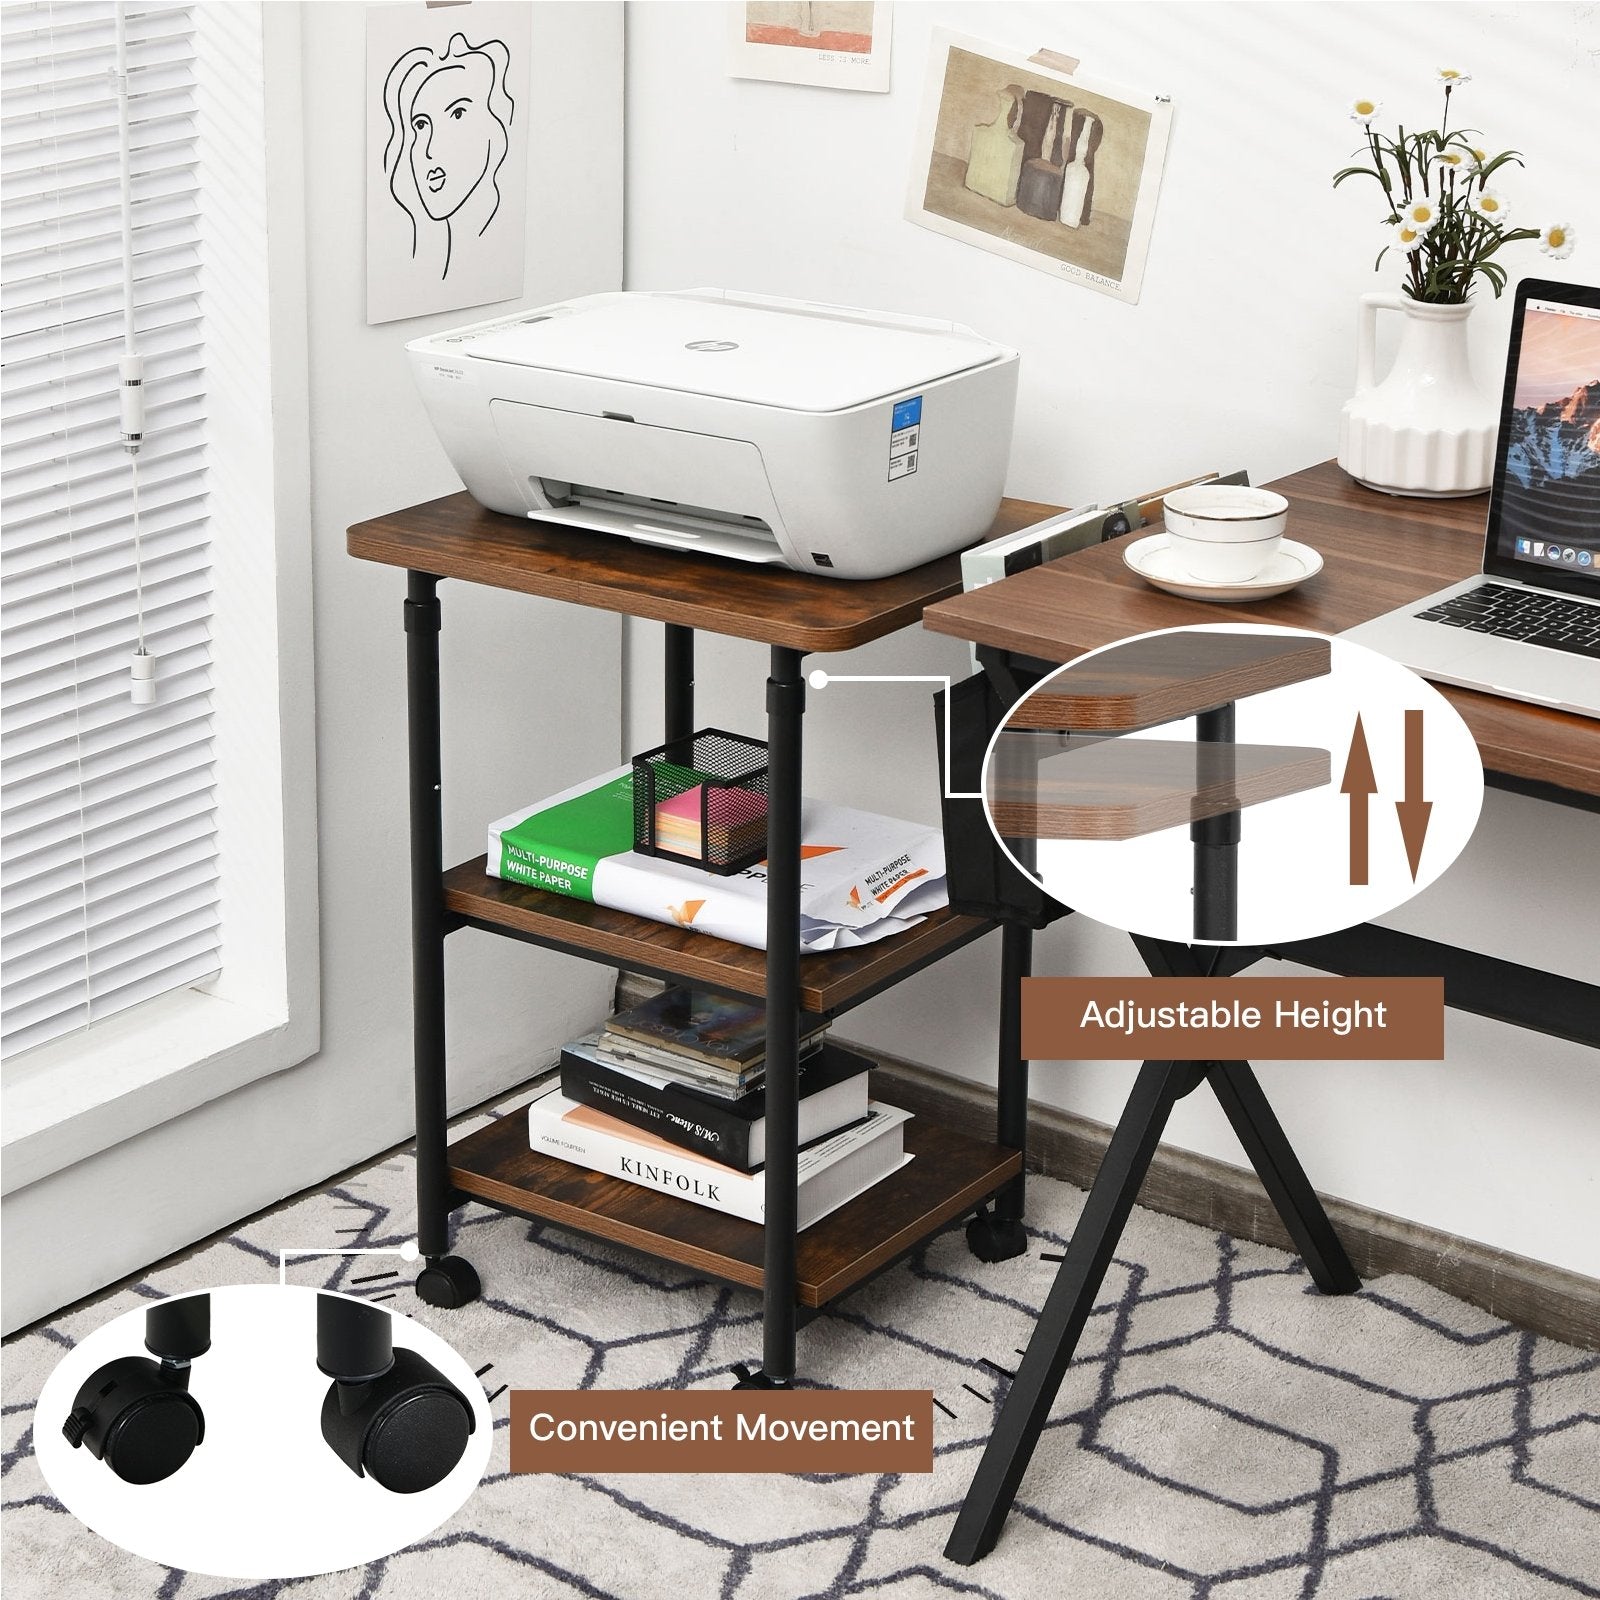 3-tier Adjustable Printer Stand with 360° Swivel Casters, Brown - Gallery Canada